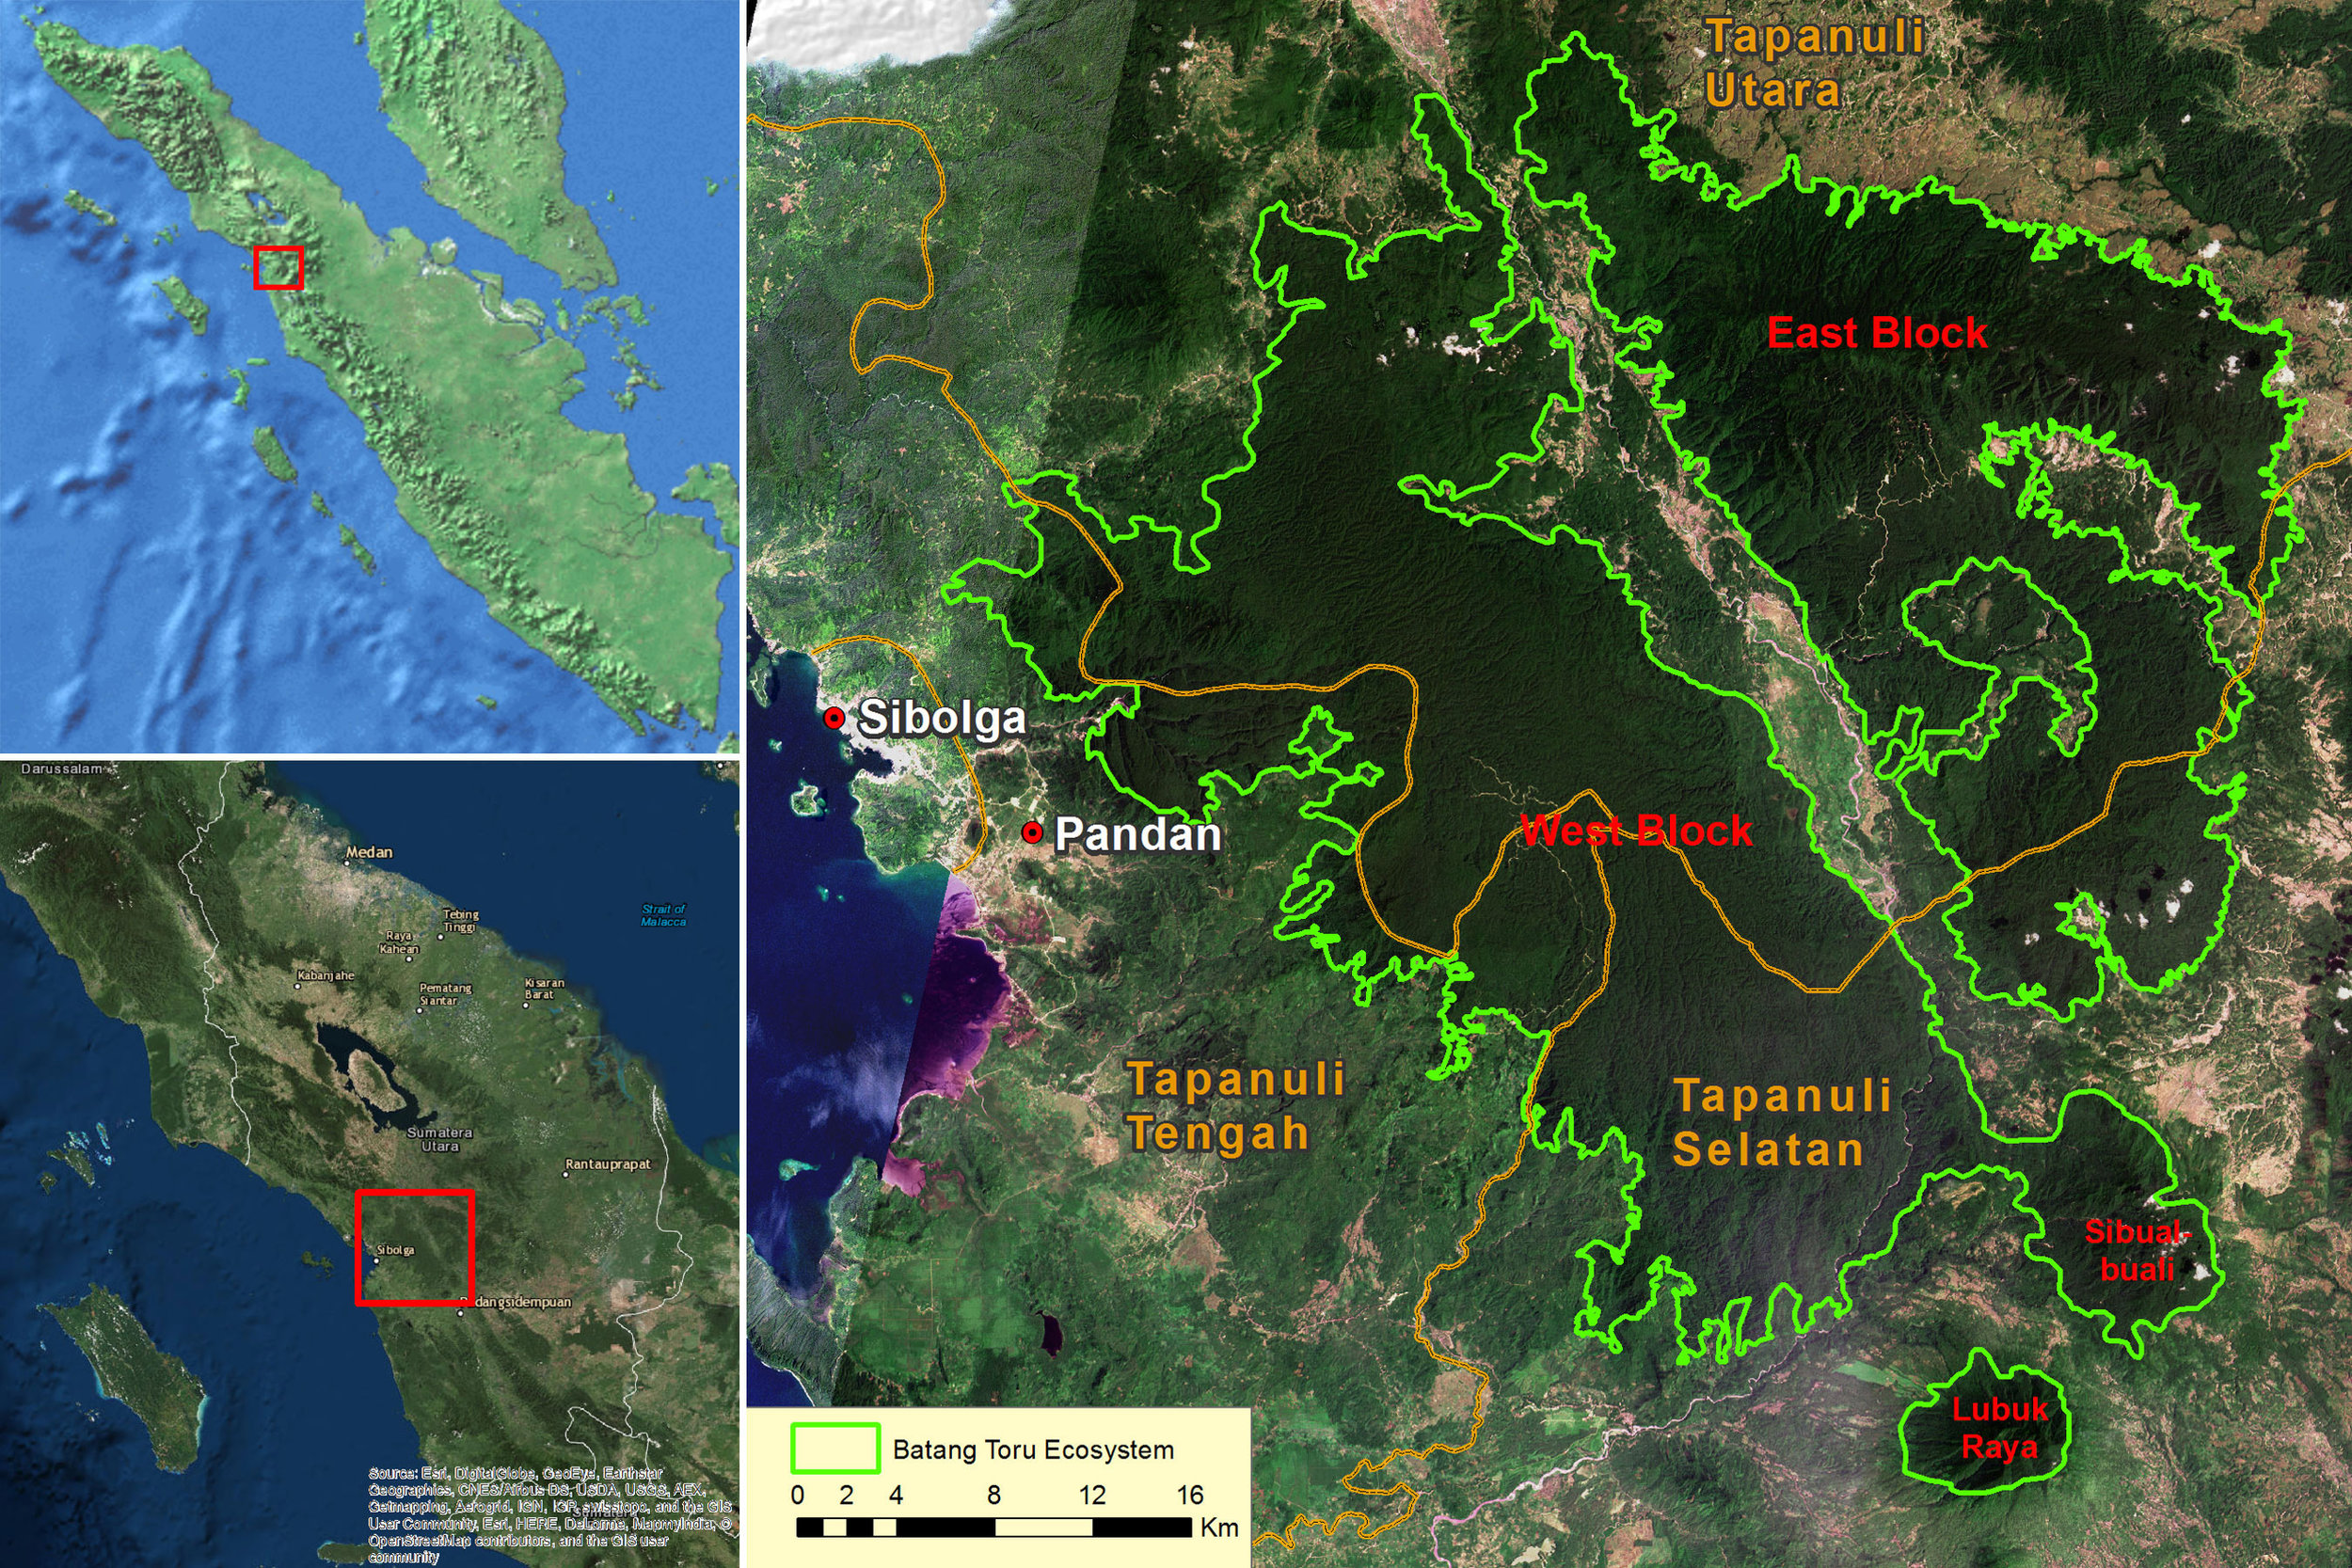 Map of Batang Toru Ecosystem, fragmented forest sections shown in orange.